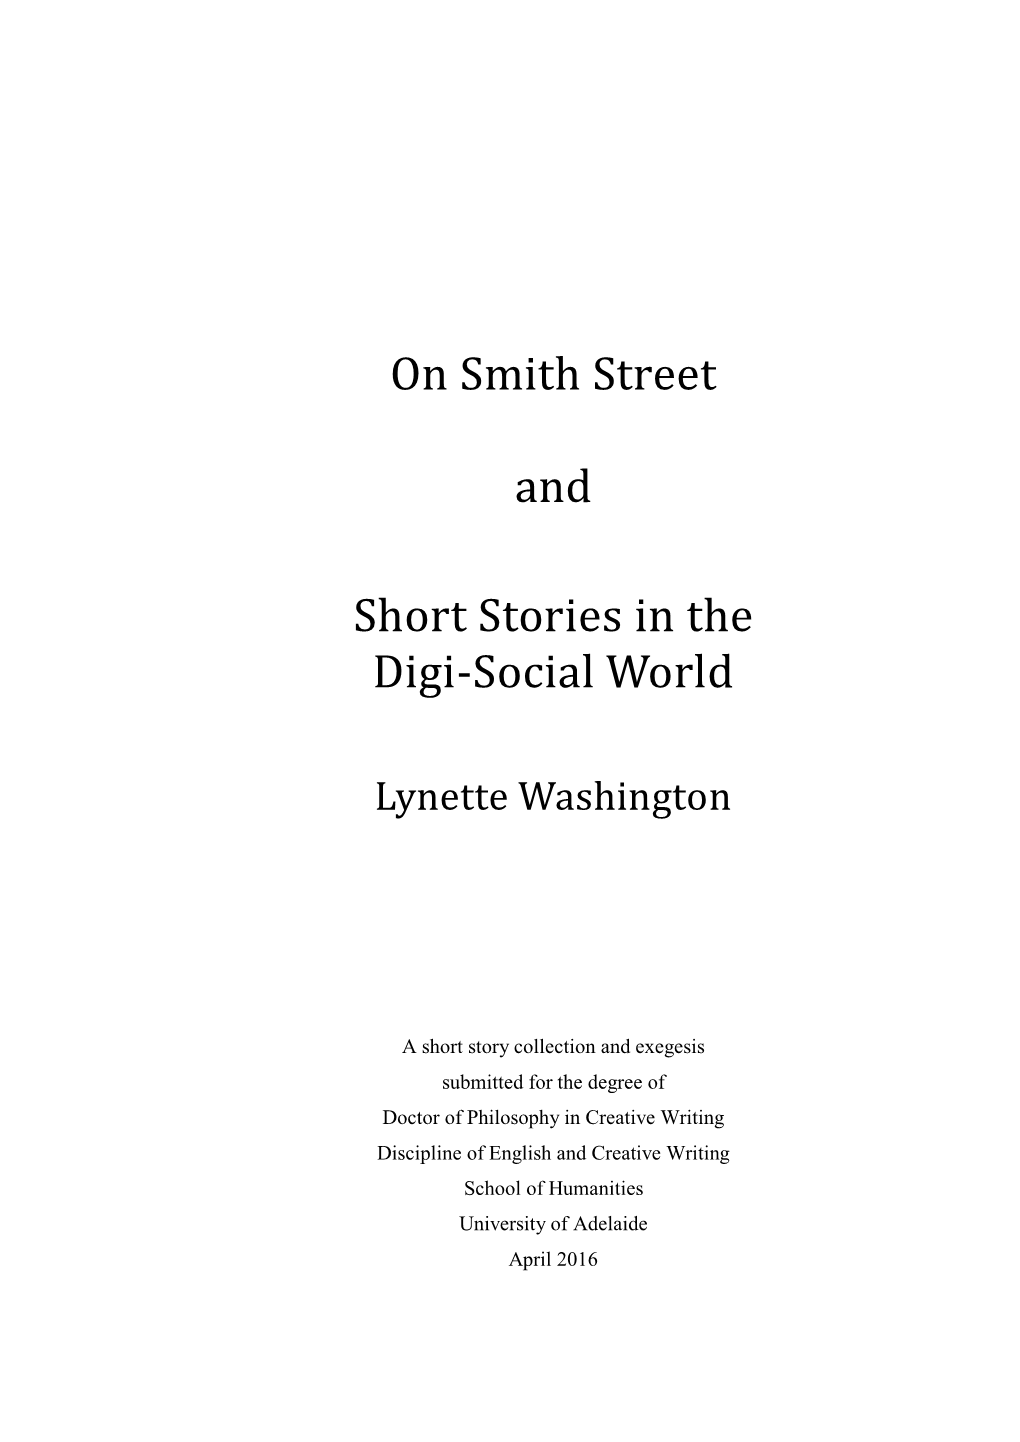 On Smith Street and Short Stories in the Digi-Social World